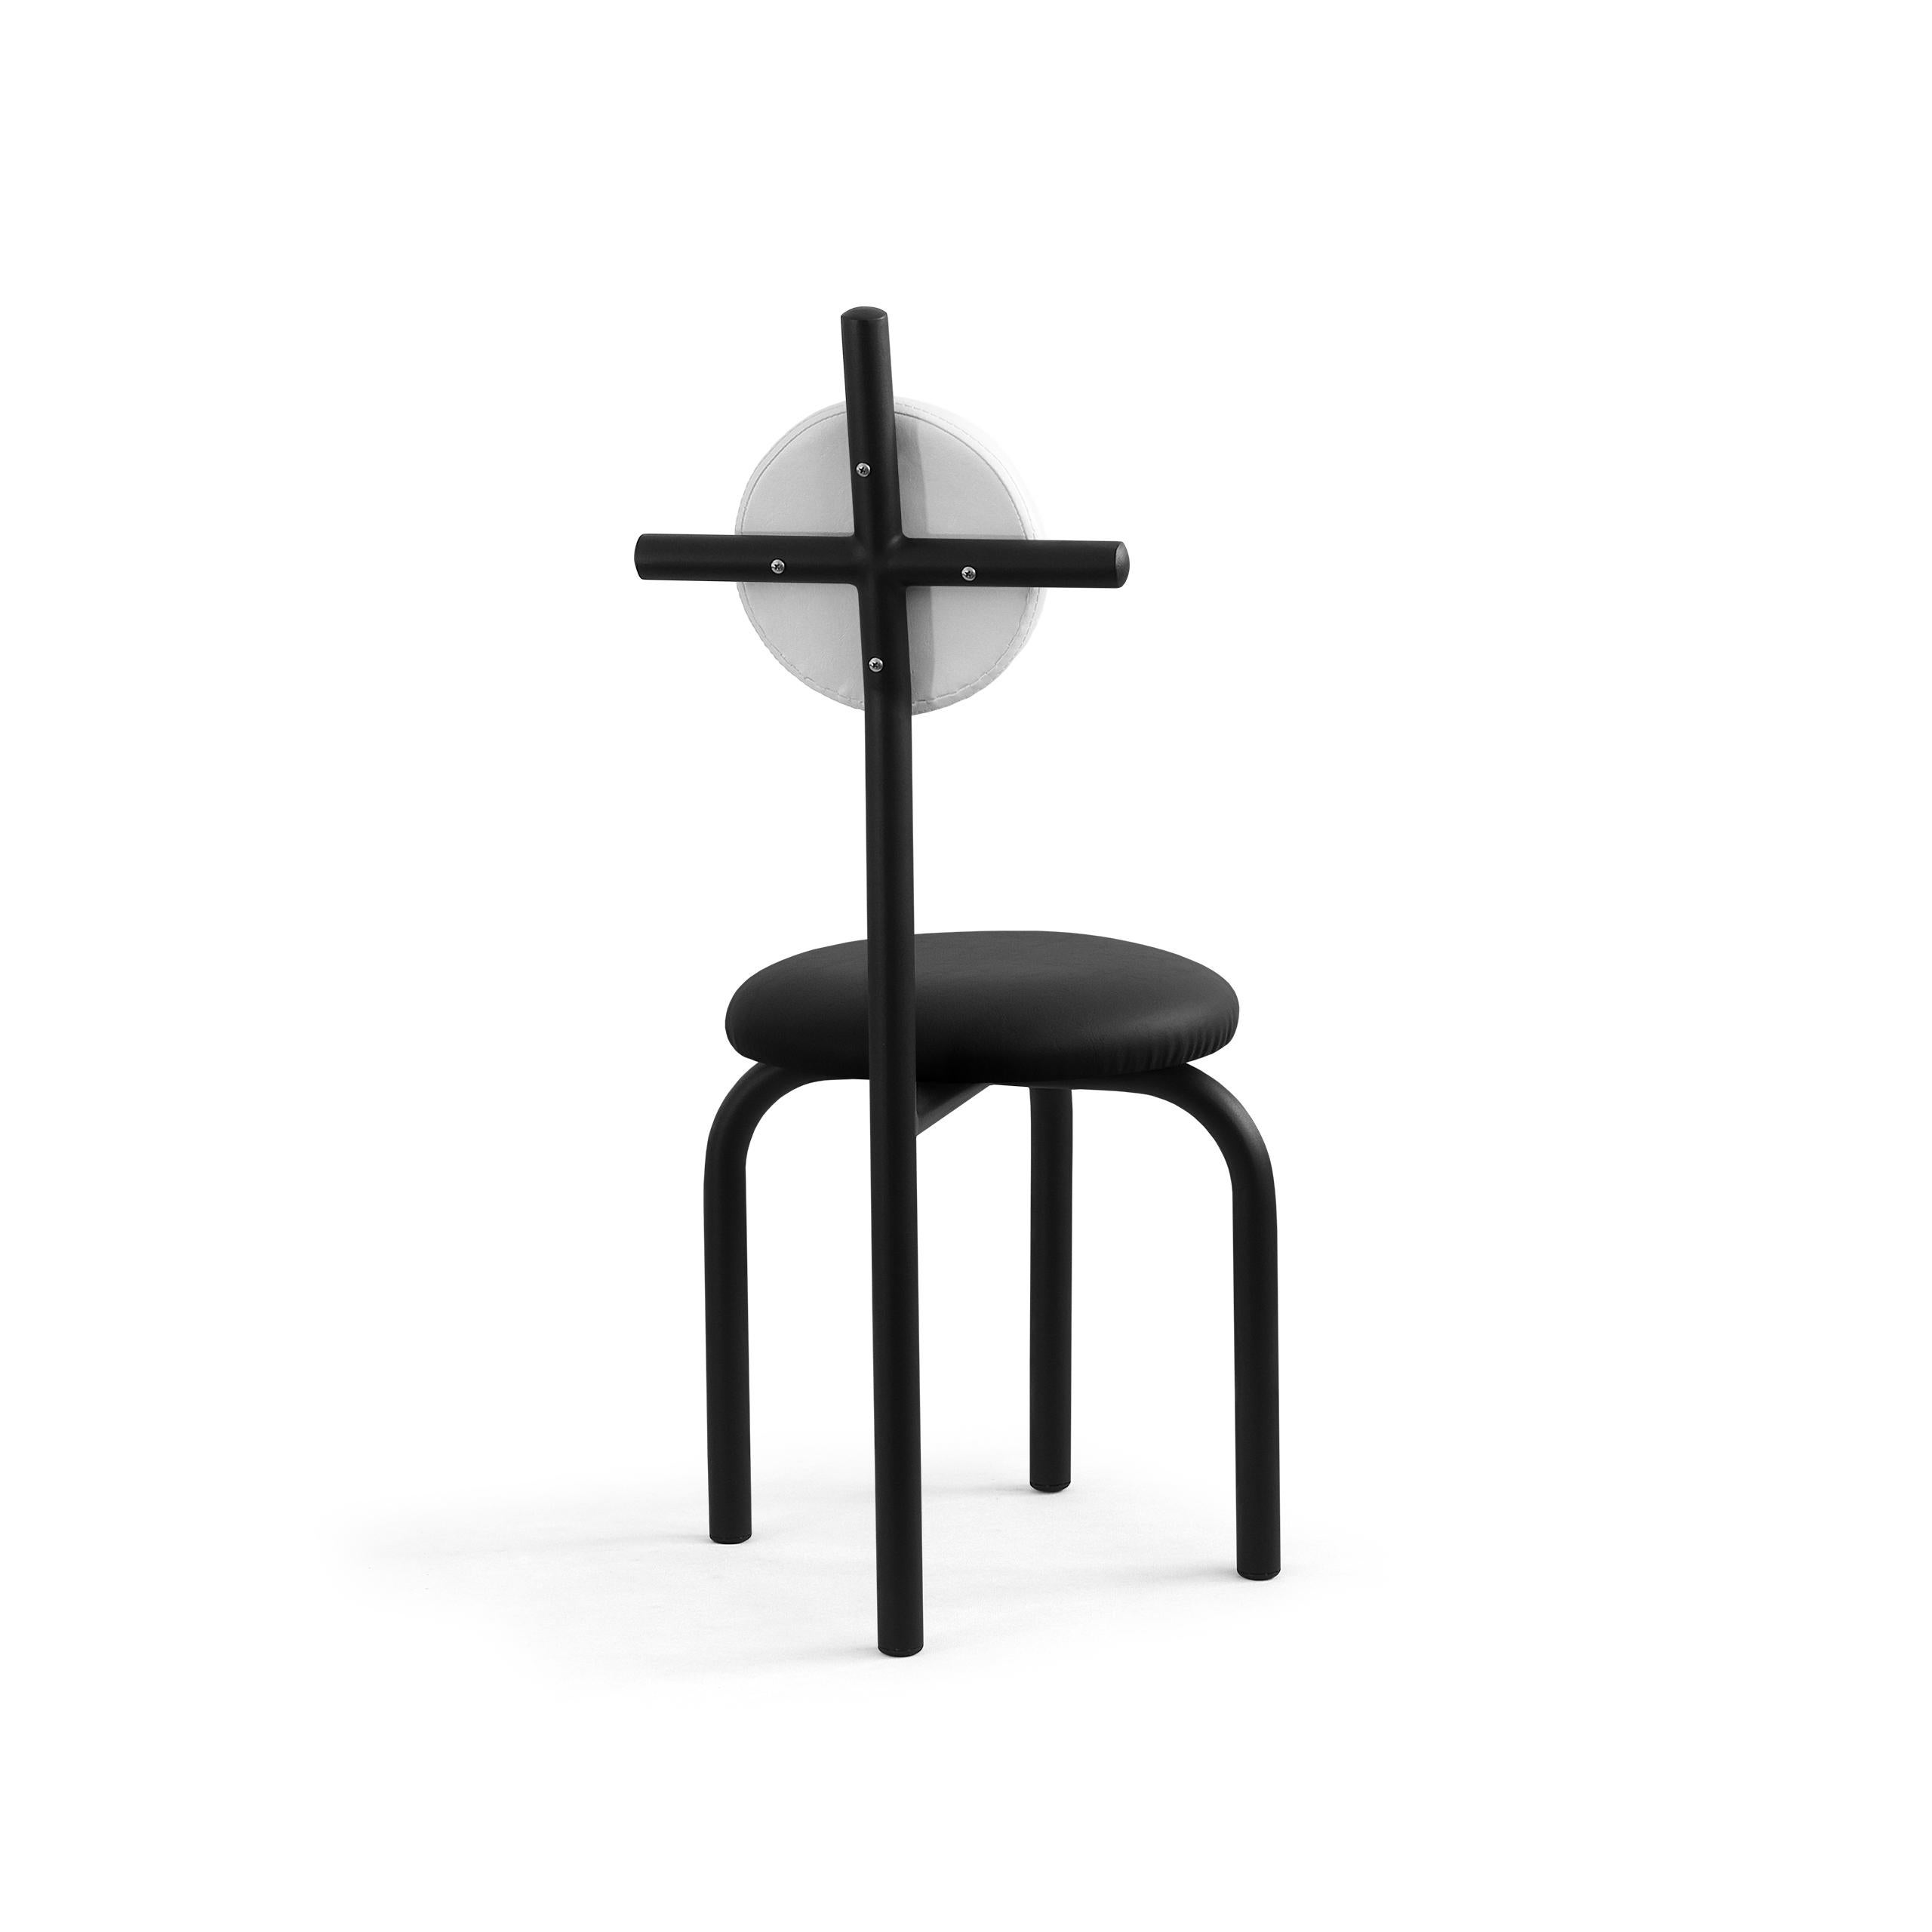 PK16 Impermeable Chair, Black Seat & Carbon Steel Structure by Paulo Kobylka In New Condition For Sale In Londrina, Paraná